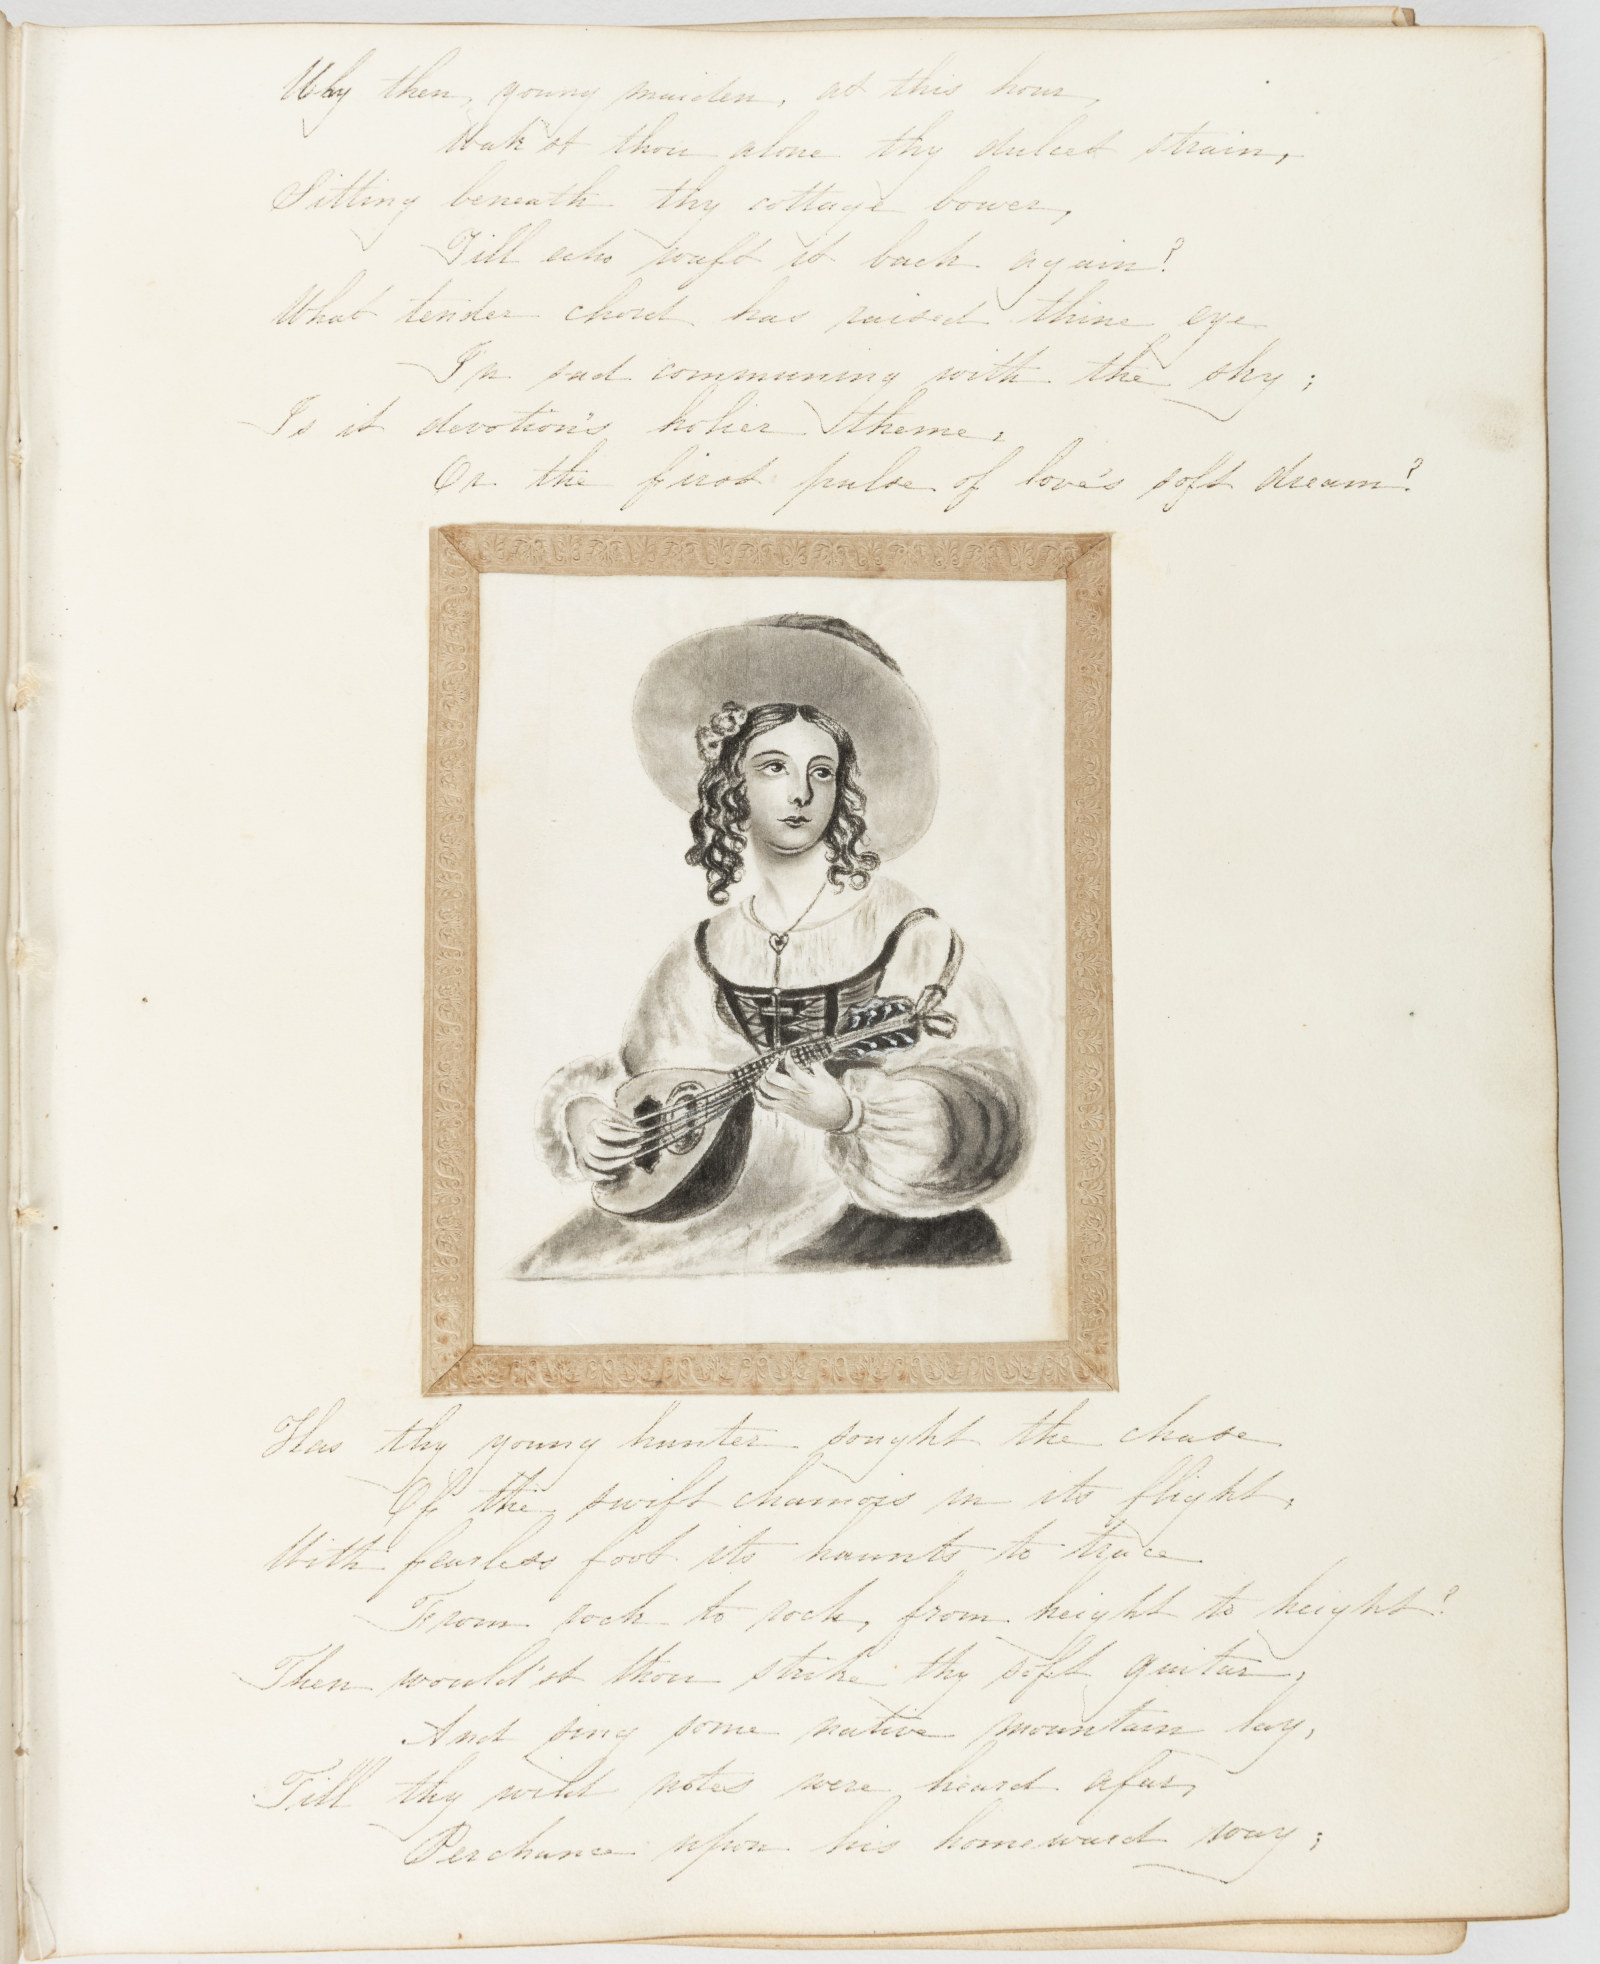 Drawing of a women playing a small guitar on a page surrounded by handwriting